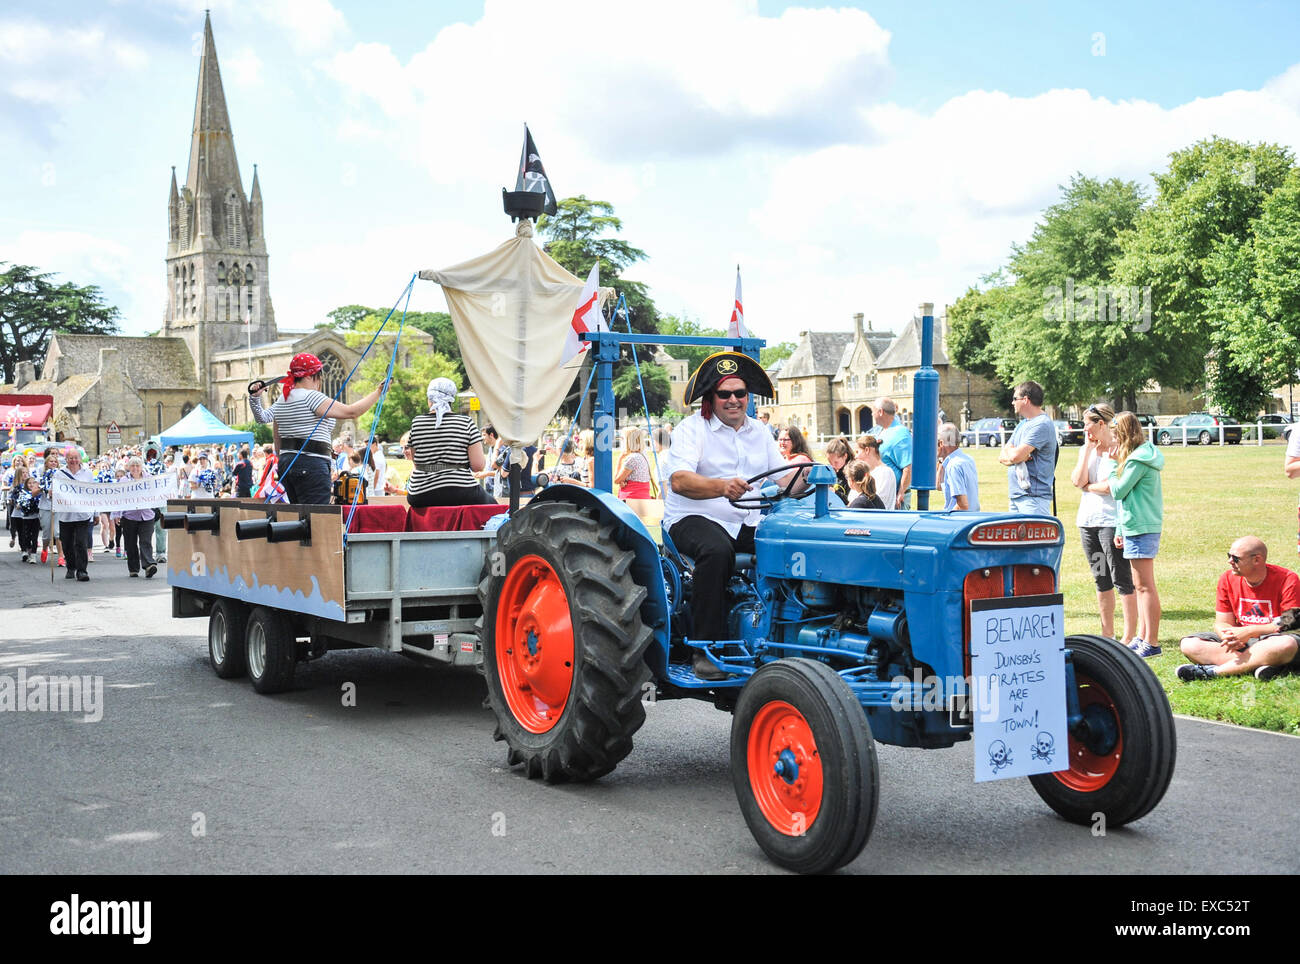 Witney, Oxfordshire, UK. 11th July, 2015.   The annual carnival through the streets of the Prime Minister's constituency of Witney was a themed event with the this year's theme being that of pirates and the sea. Given that this is one of the the most landlocked places in England this is a surprising and innovative theme for the famous Wool town to have.  Credit:  Desmond Brambley/Alamy Live News Stock Photo